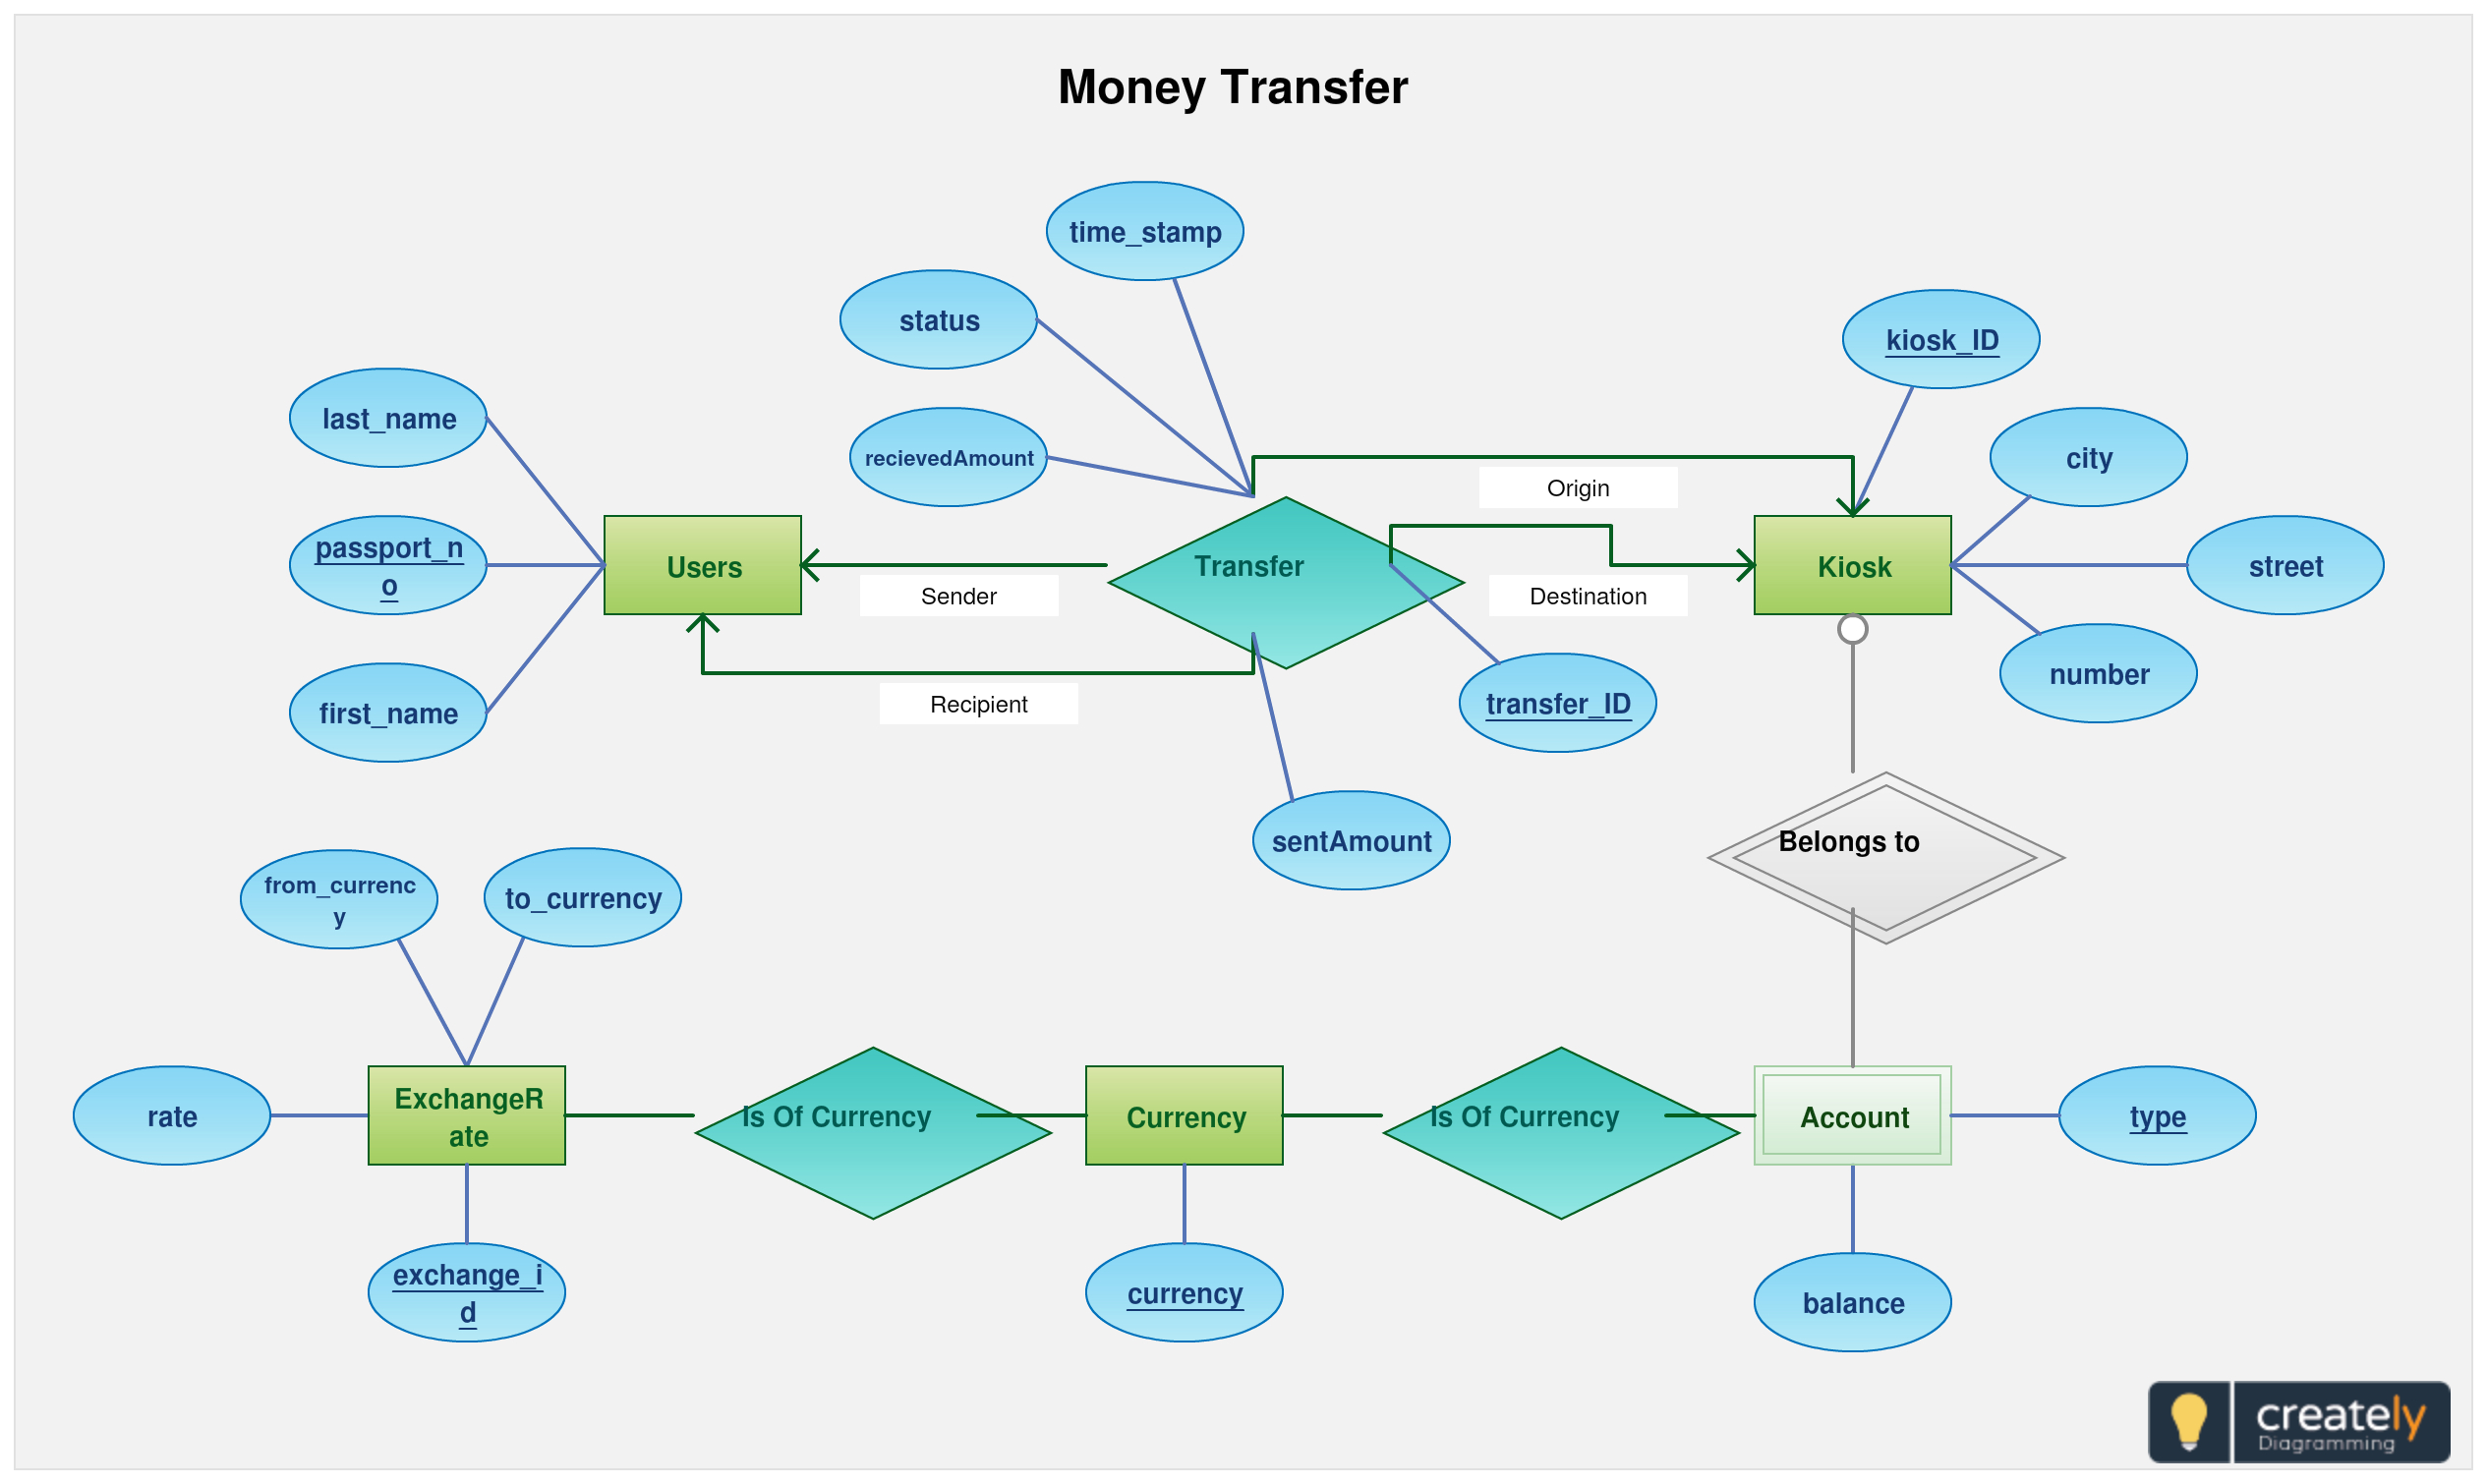 Entity Relationship Diagram Of Fund Transfer - Use This pertaining to Er Diagram Basic Concepts